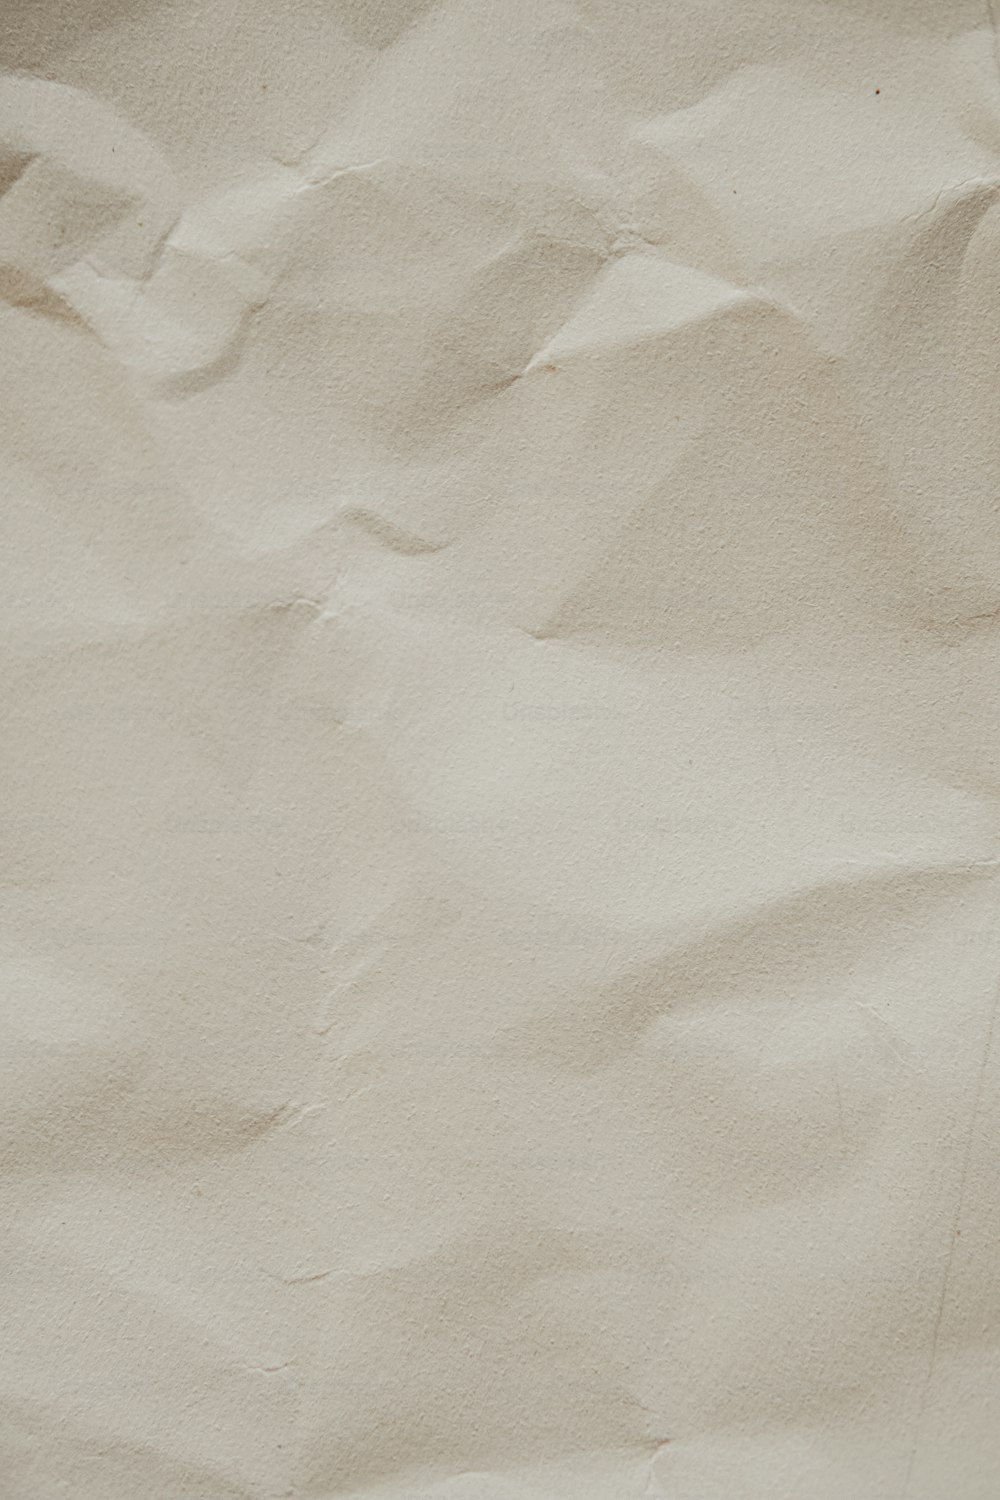 Paper Texture Photos, Download The BEST Free Paper Texture Stock